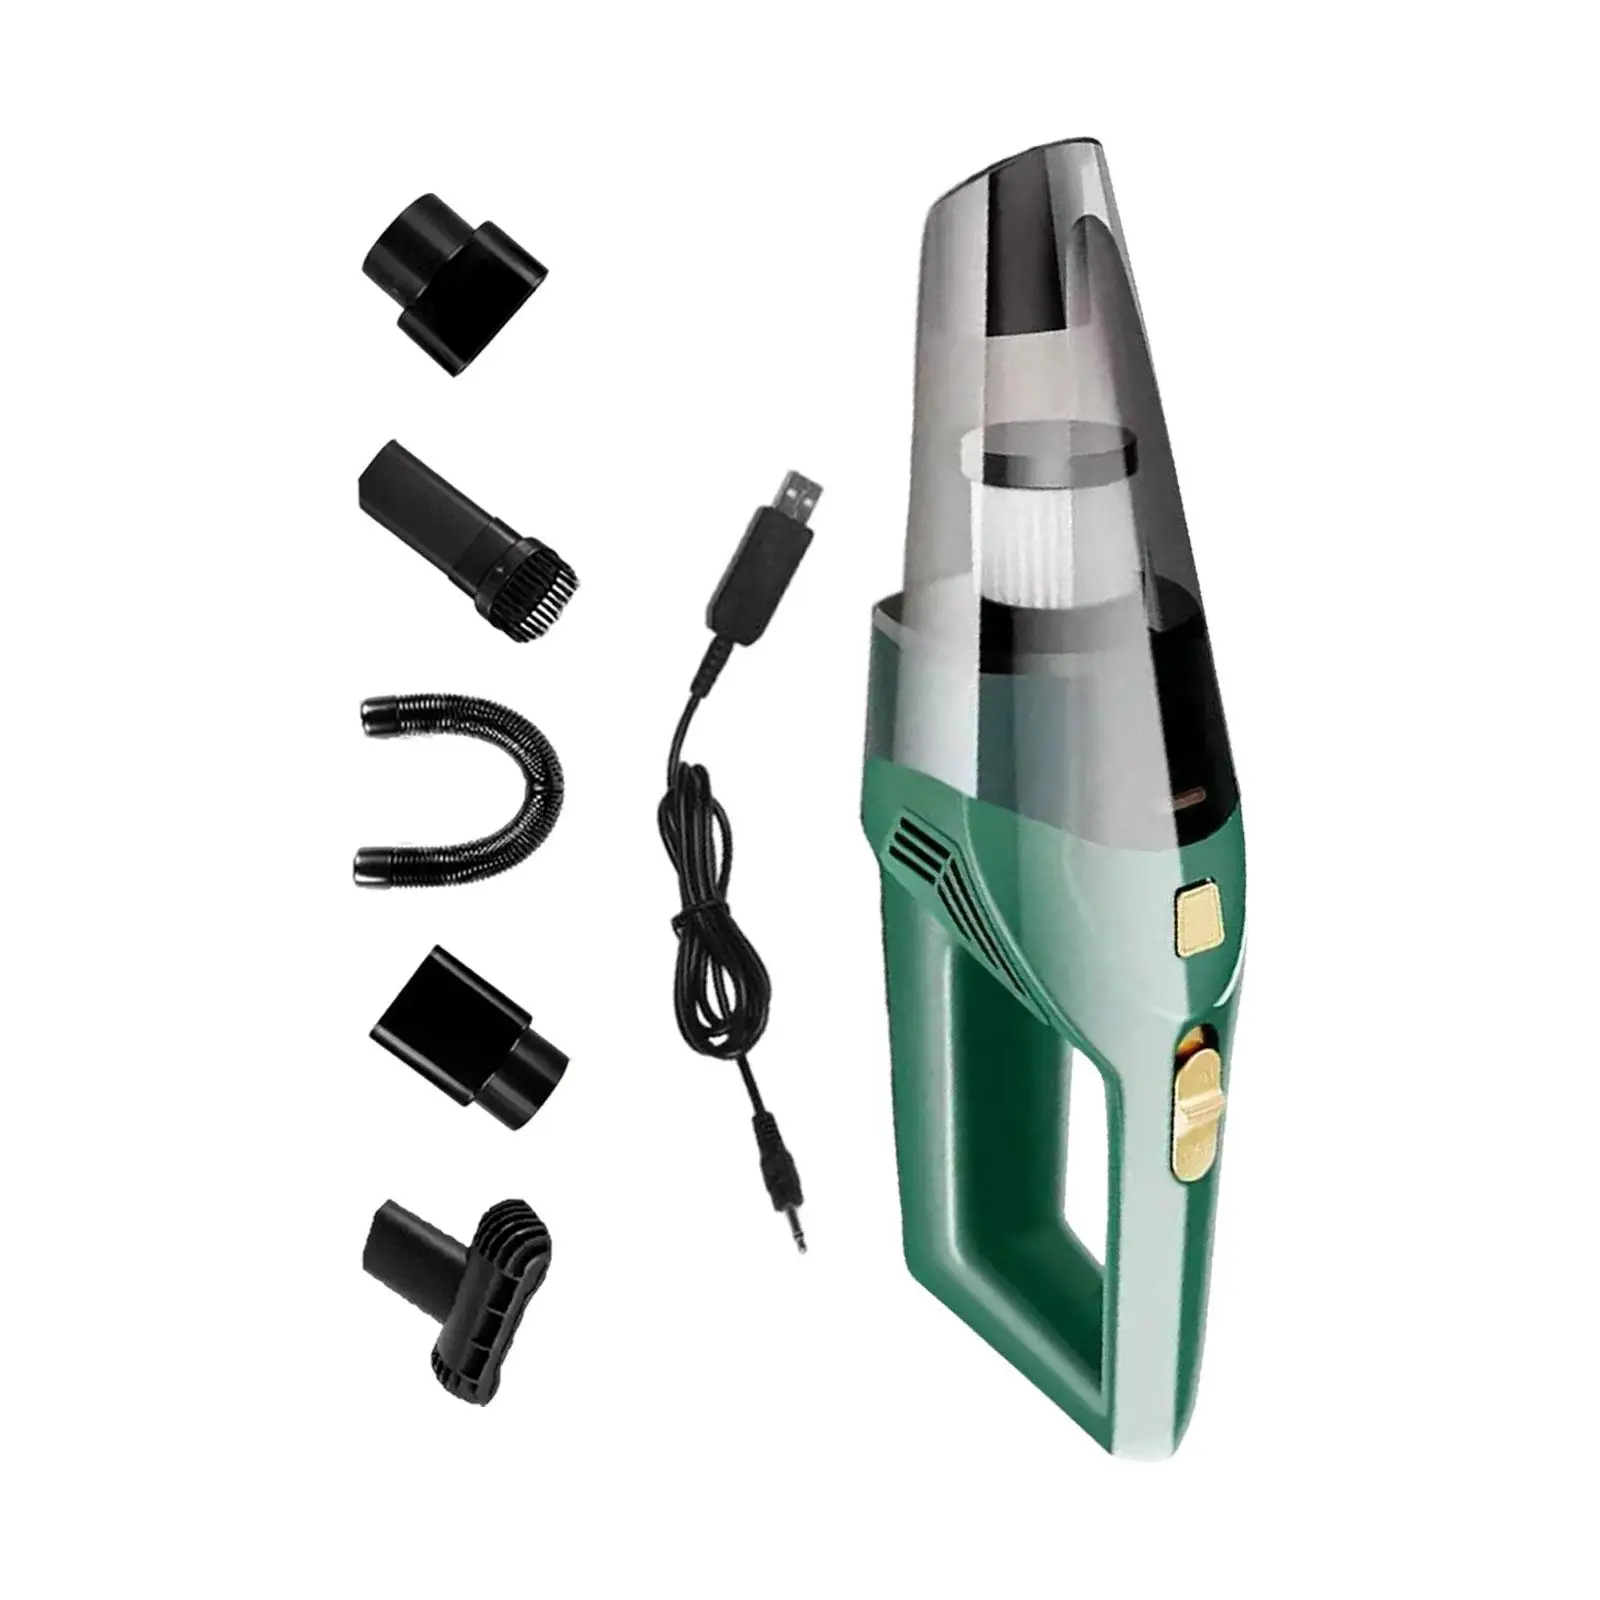 4800PA 120W High Power Car Vacuum Cleaner for Auto Interior Kitchen